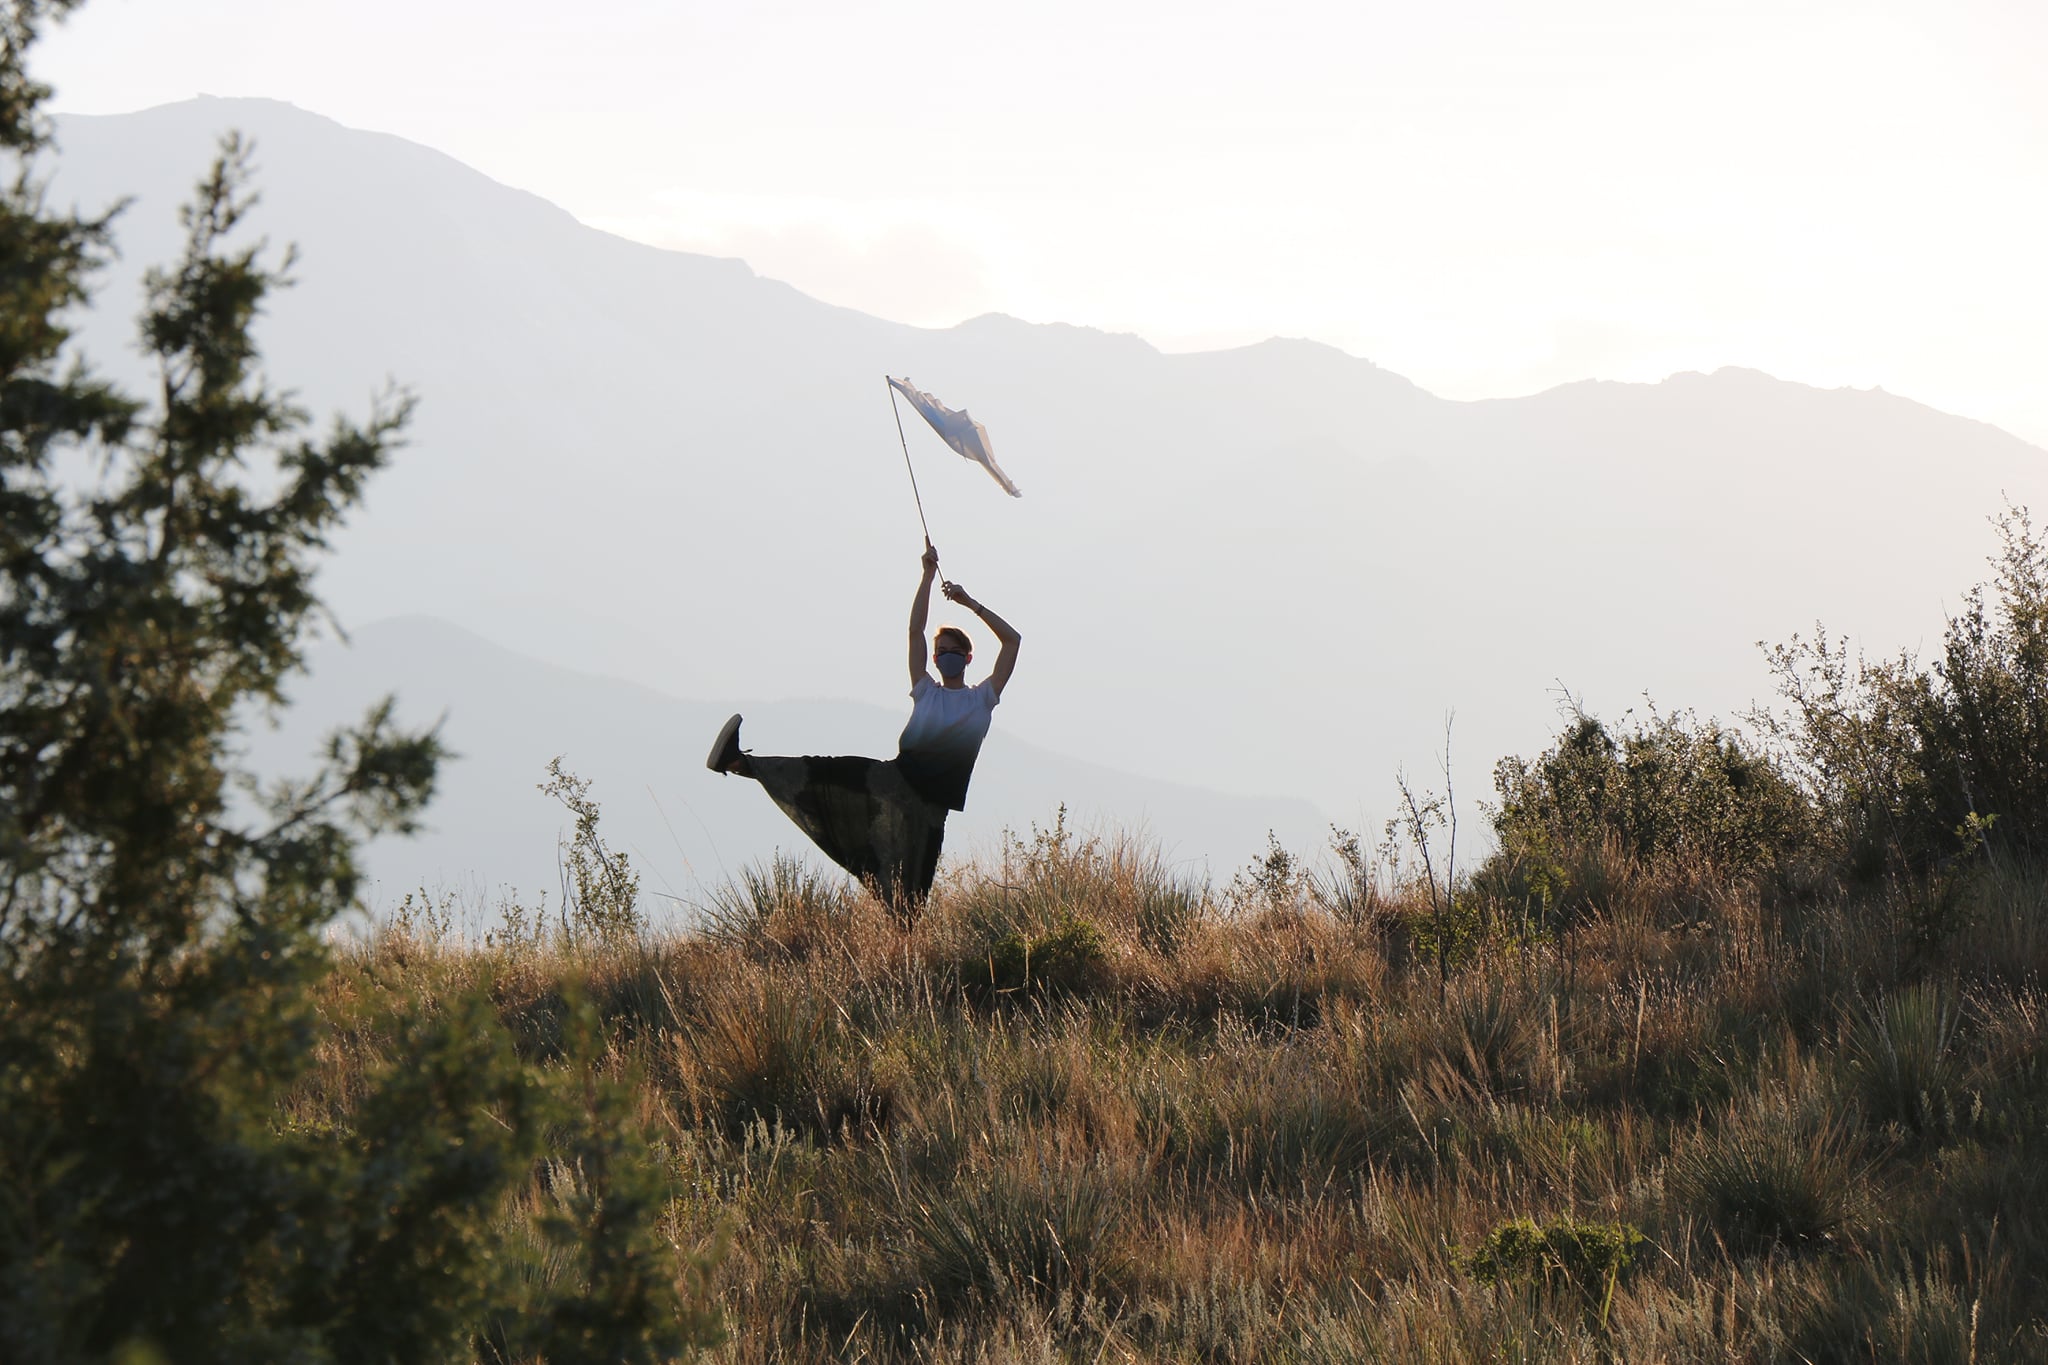 Dohee Lee dancing in field with flag and mountain backdrop